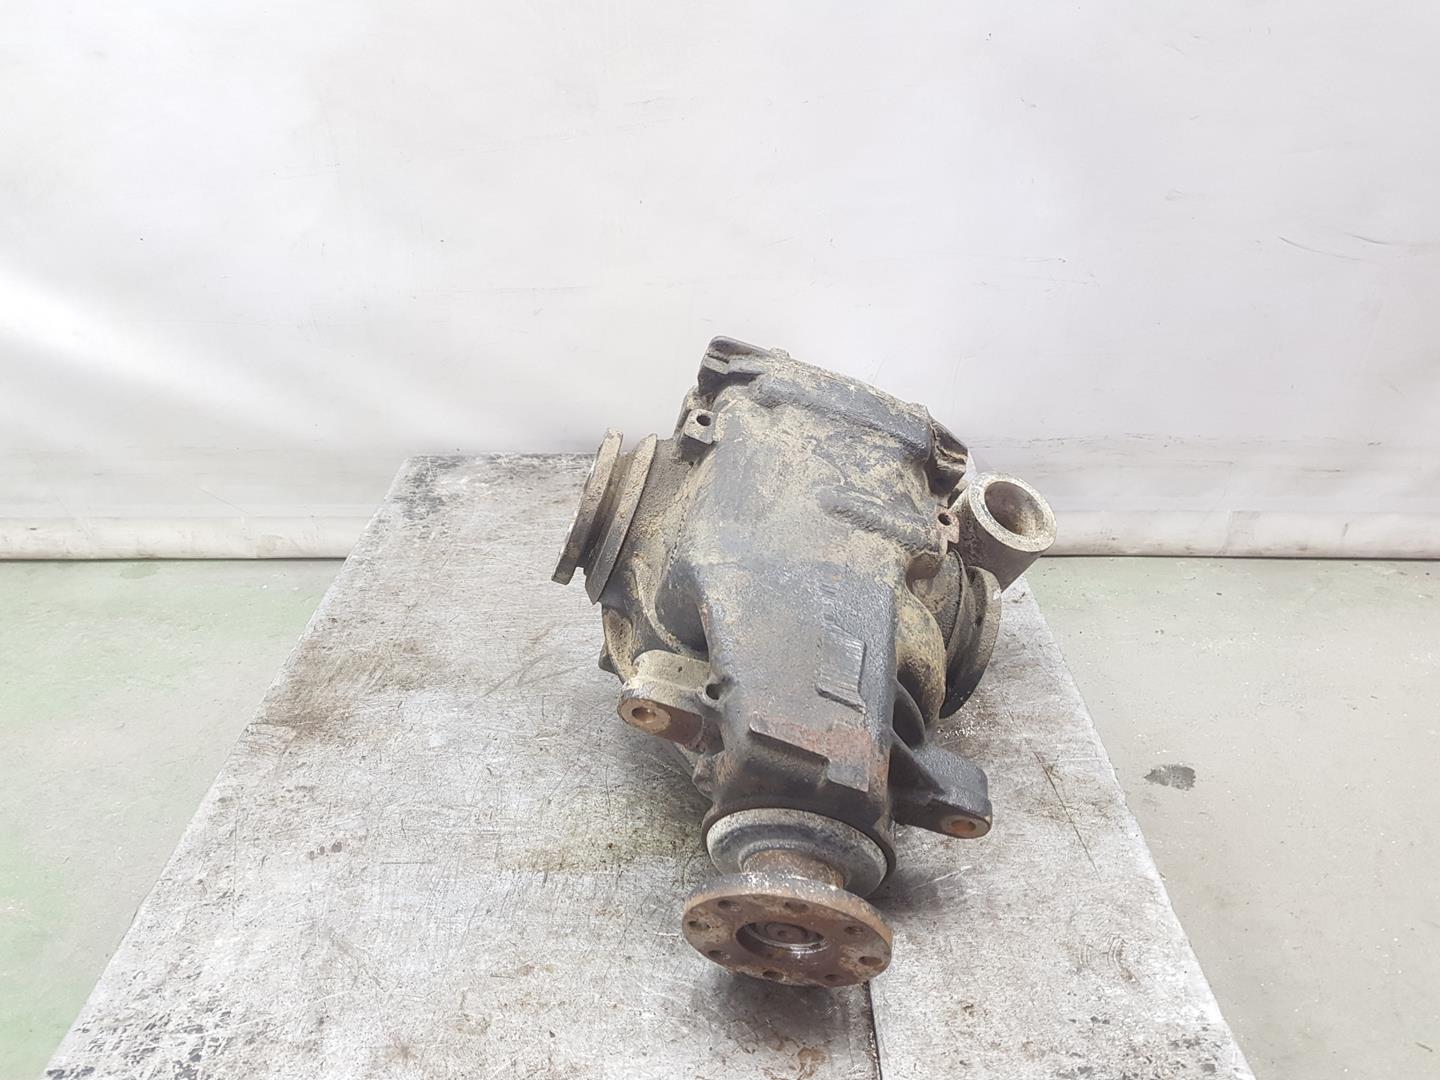 BMW 3 Series E46 (1997-2006) Rear Differential 33101428797, 33101428797, I=247 19829701